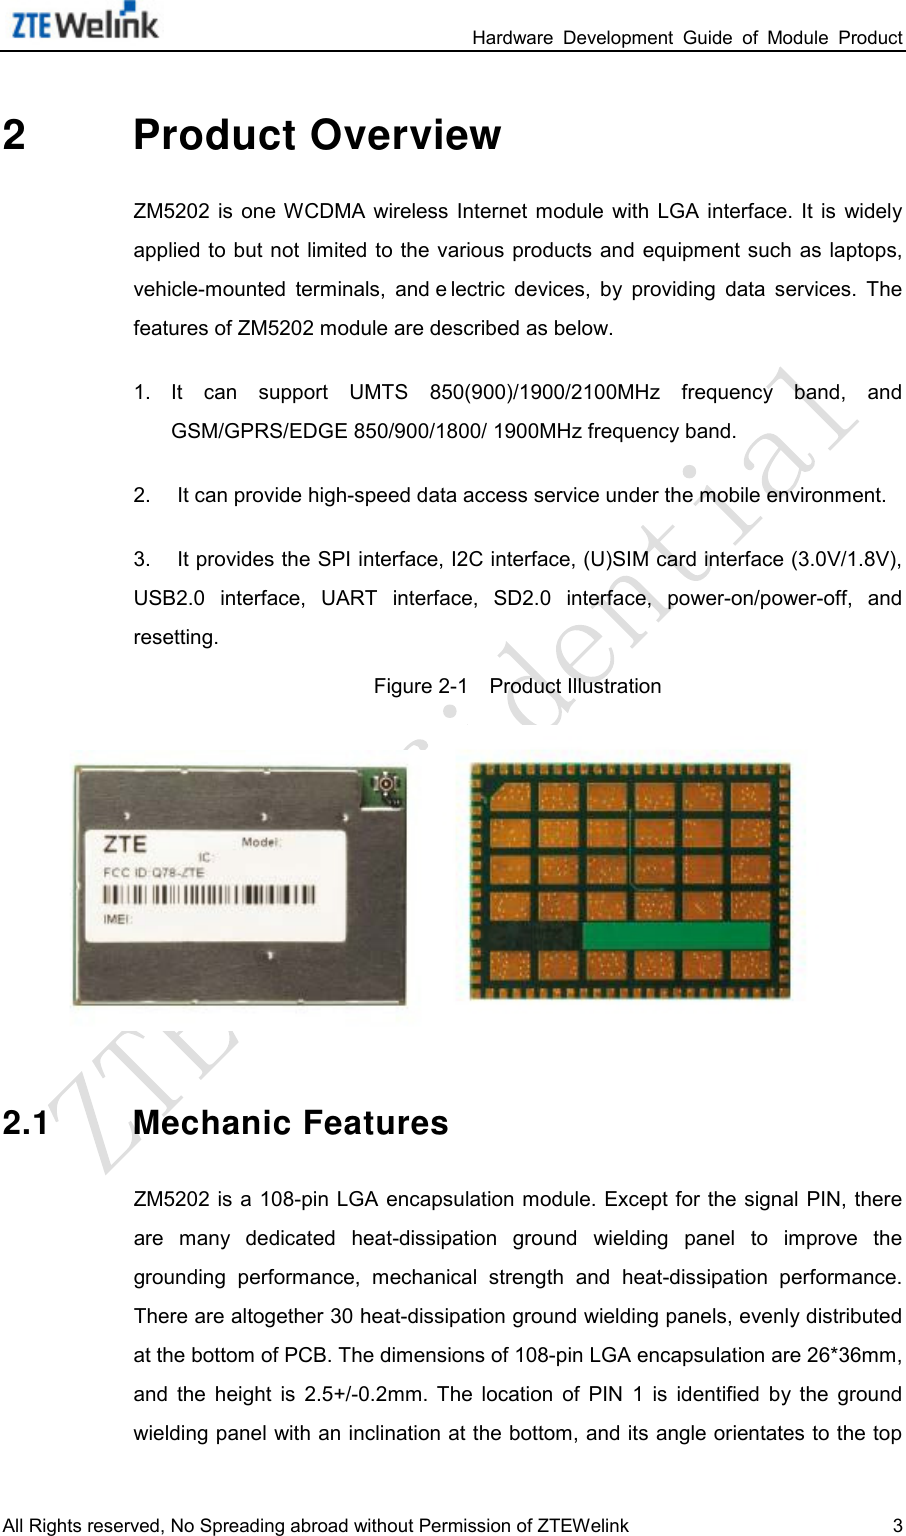                                                                 Hardware  Development  Guide  of  Module  Product All Rights reserved, No Spreading abroad without Permission of ZTEWelink  3 2  Product Overview ZM5202 is  one WCDMA  wireless Internet  module  with  LGA  interface.  It  is  widely applied to but not limited to the various products and equipment  such as laptops, vehicle-mounted  terminals,  and e lectric  devices,  by  providing data  services.  The features of ZM5202 module are described as below.     1. It  can  support  UMTS  850(900)/1900/2100MHz frequency  band,  and GSM/GPRS/EDGE 850/900/1800/ 1900MHz frequency band.   2.  It can provide high-speed data access service under the mobile environment.   3.  It provides the SPI interface, I2C interface, (U)SIM card interface (3.0V/1.8V), USB2.0  interface,  UART  interface,  SD2.0 interface, power-on/power-off,  and resetting.   Figure 2-1    Product Illustration  2.1 Mechanic Features ZM5202 is  a 108-pin LGA encapsulation module. Except for the signal  PIN, there are  many  dedicated  heat-dissipation  ground  wielding  panel  to  improve  the grounding  performance,  mechanical  strength  and  heat-dissipation  performance. There are altogether 30 heat-dissipation ground wielding panels, evenly distributed at the bottom of PCB. The dimensions of 108-pin LGA encapsulation are 26*36mm, and  the  height  is  2.5+/-0.2mm.  The  location  of  PIN 1  is  identified  by  the  ground wielding panel with an inclination at the bottom, and its angle orientates to the top 